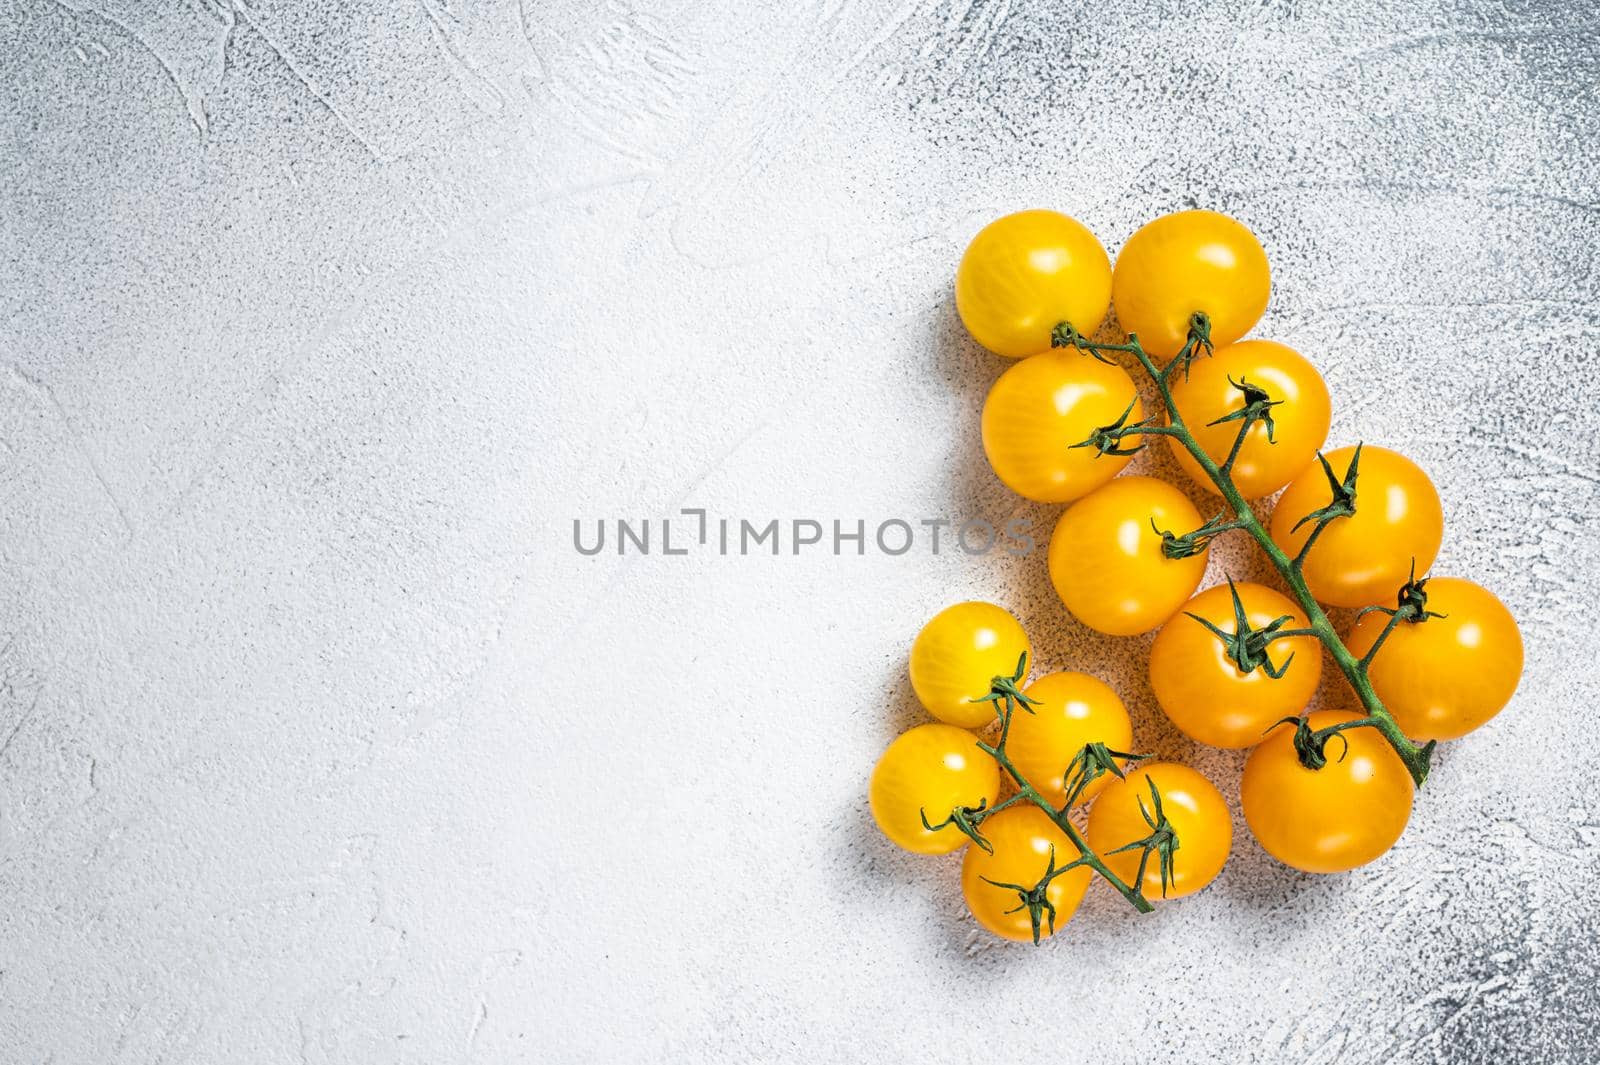 Small yellow cherry tomato on a kitchen table. White background. Top view. Copy space.